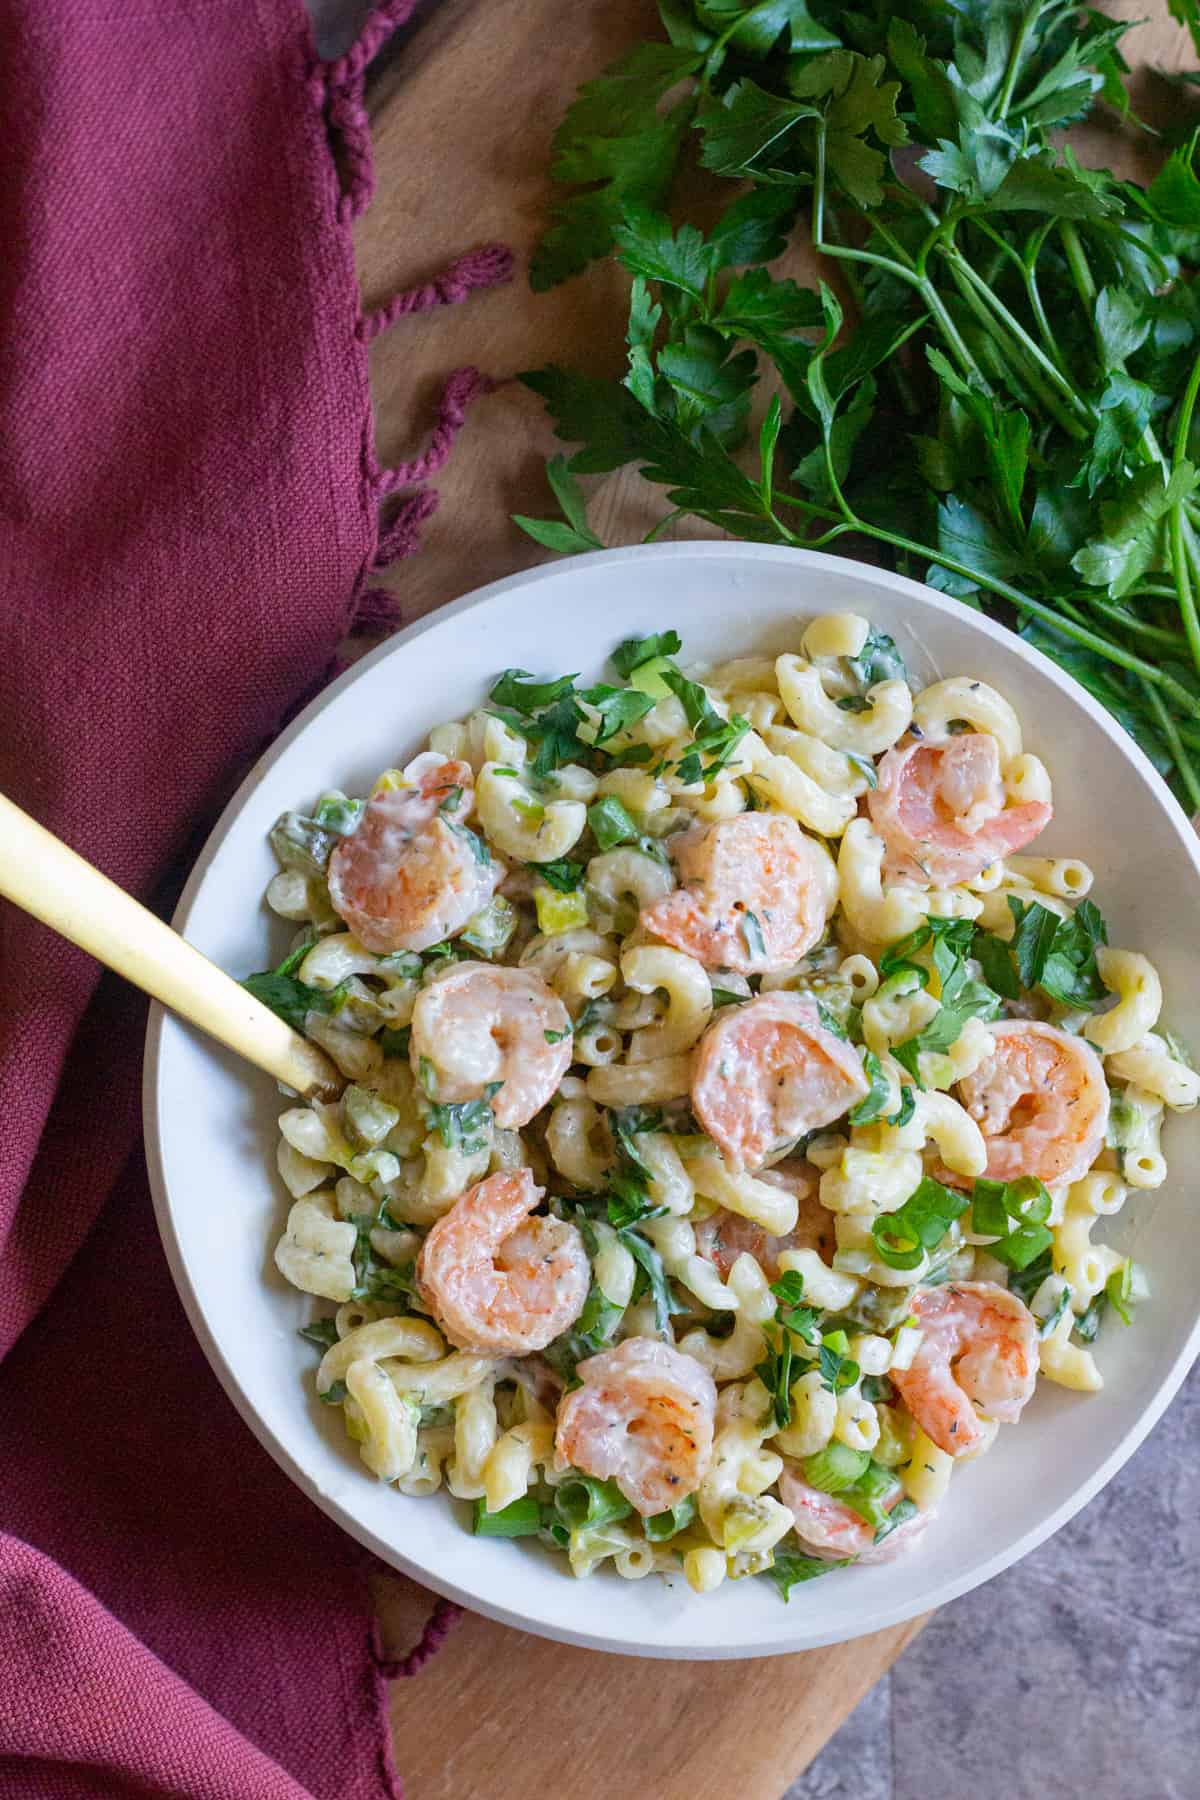 This easy shrimp pasta salad is packed with so much flavor. Learn how to make the best shrimp macaroni salad that will rock your parties and potlucks.